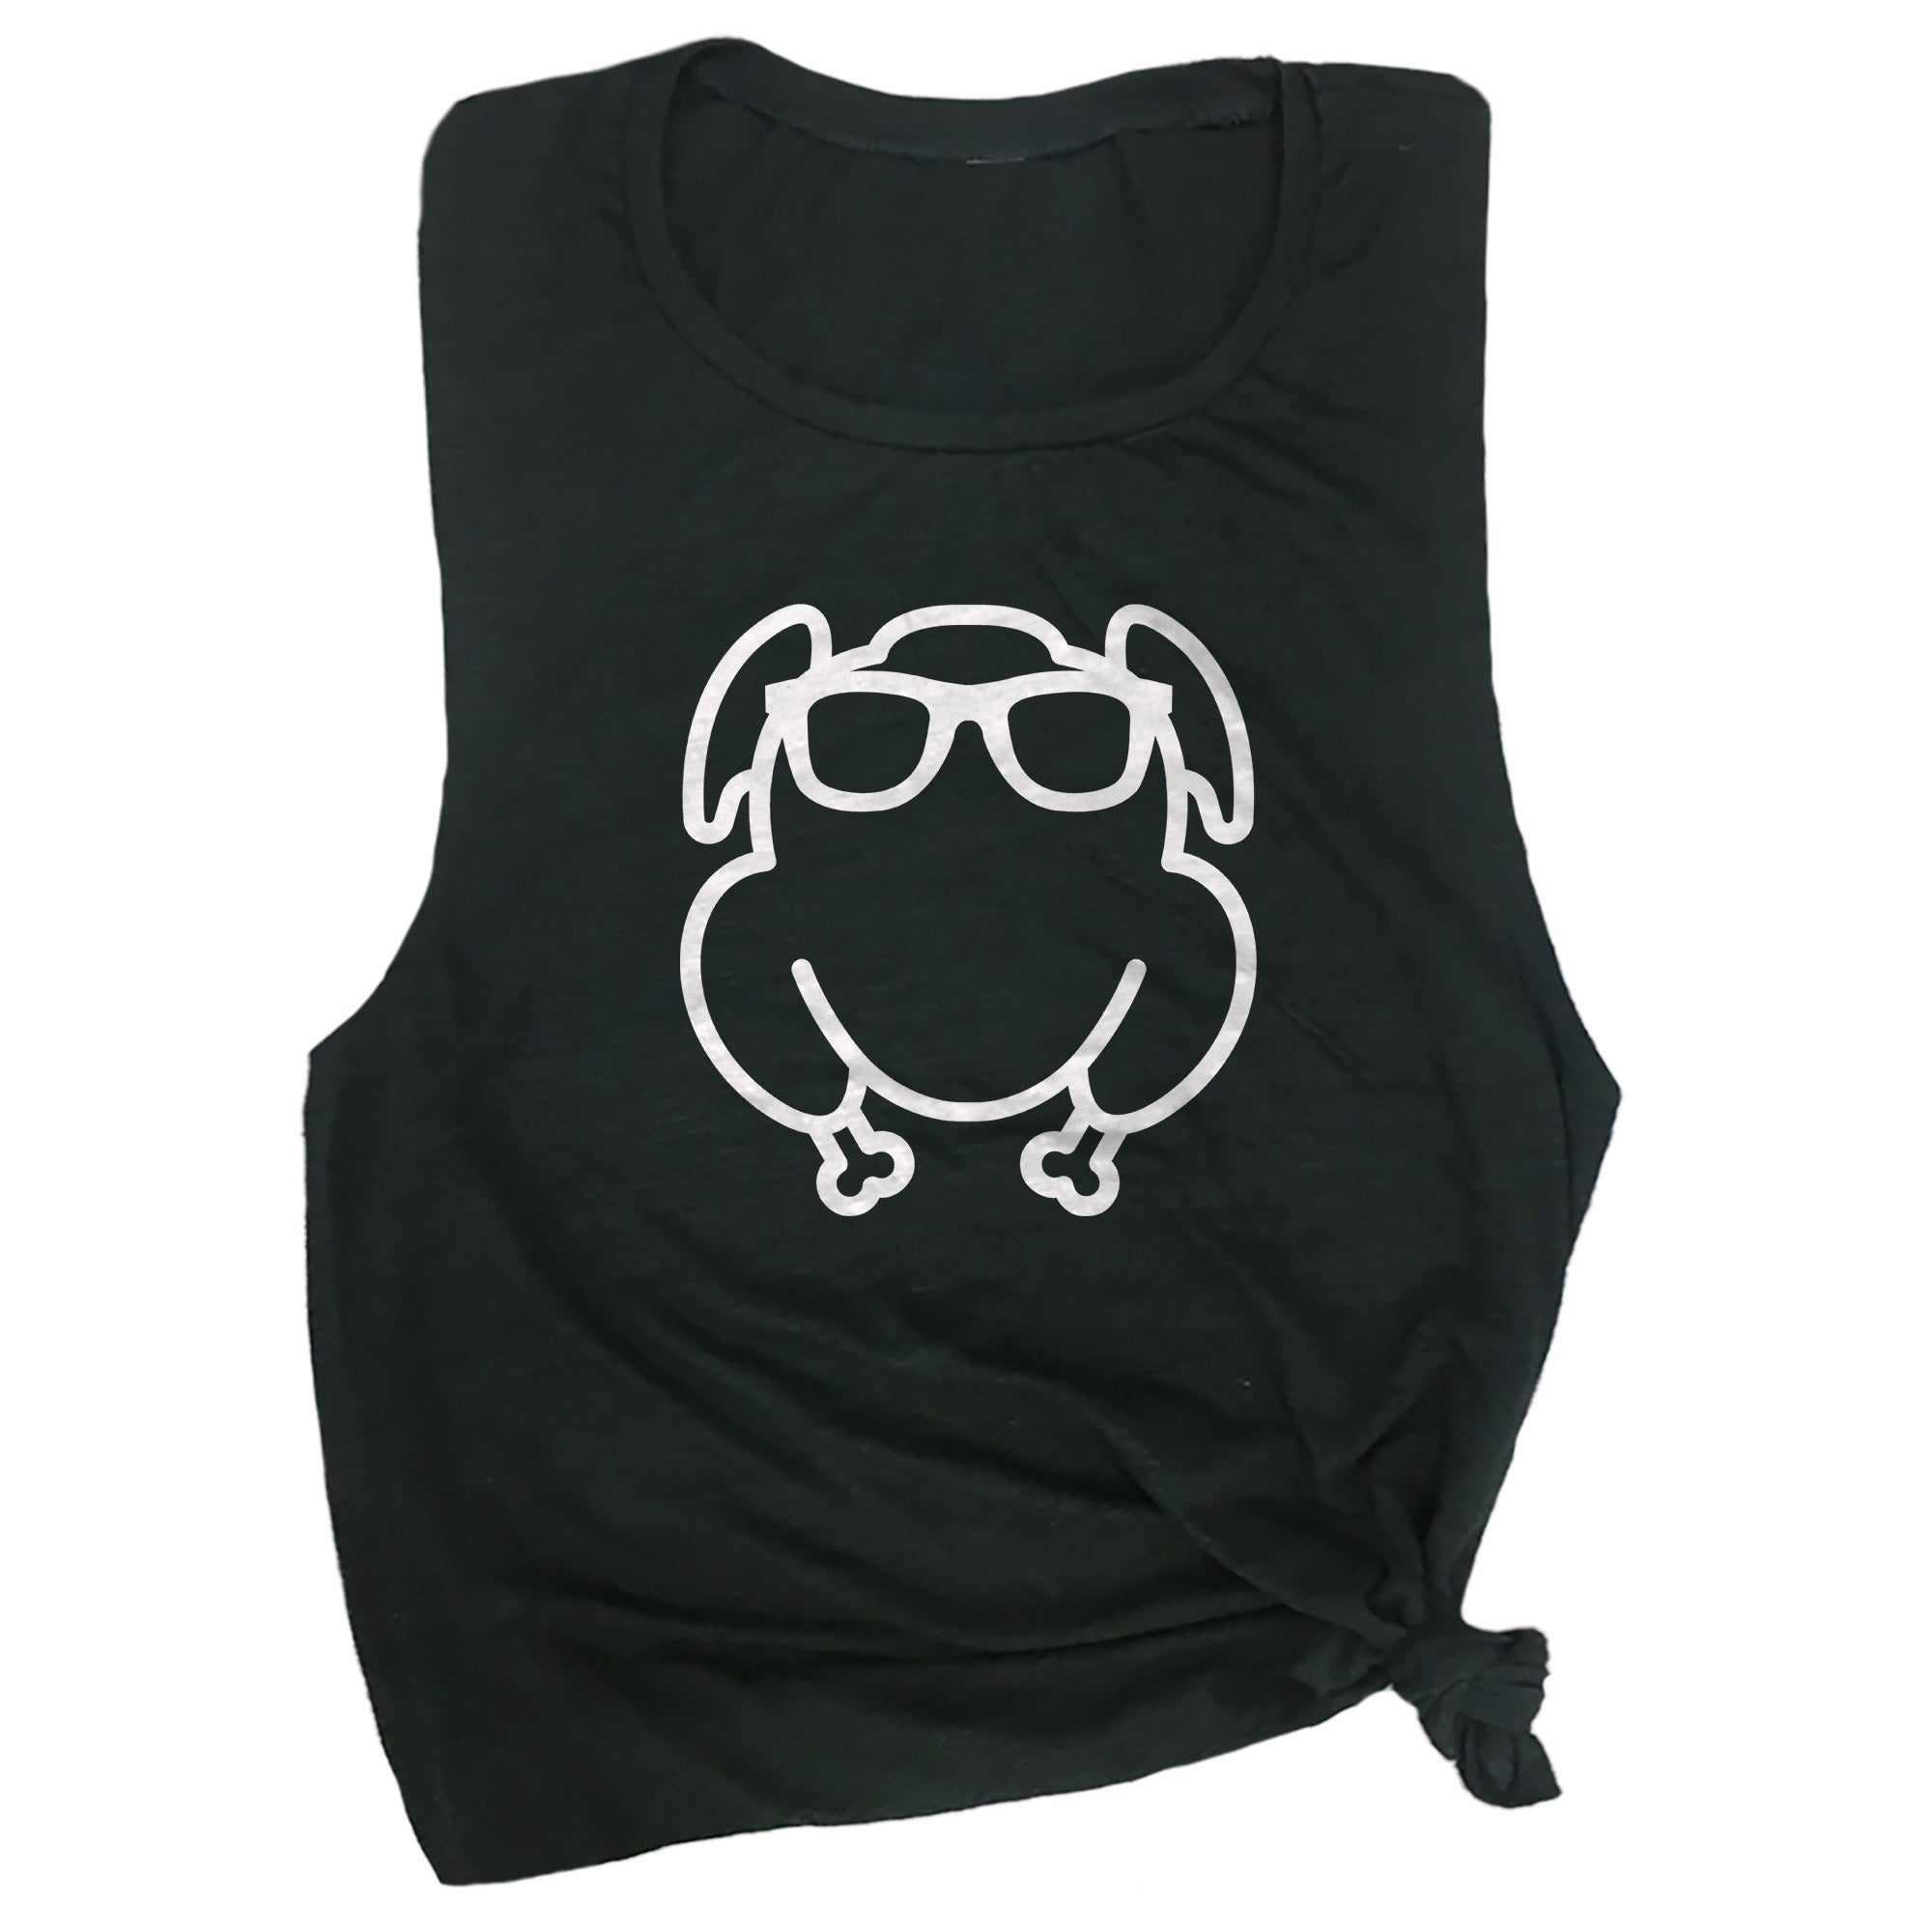 Turkey with Sunglasses Muscle Tee